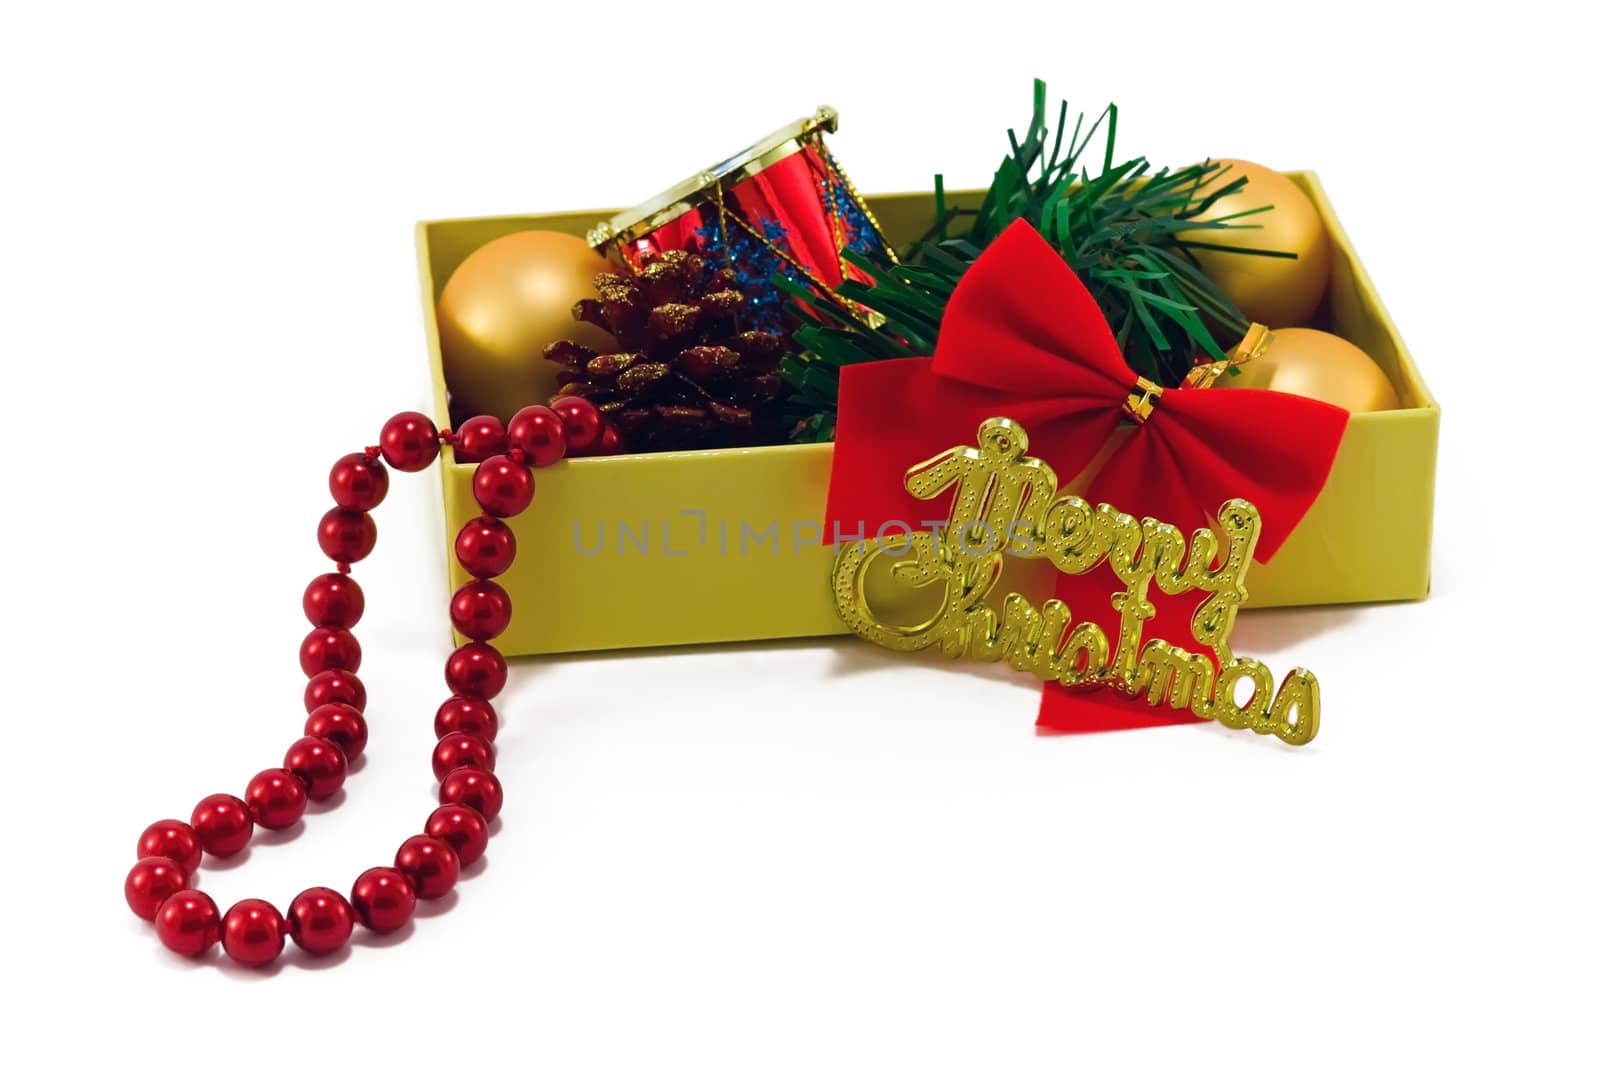 Christmas box with golden balls, strobile, beads and red drum on white